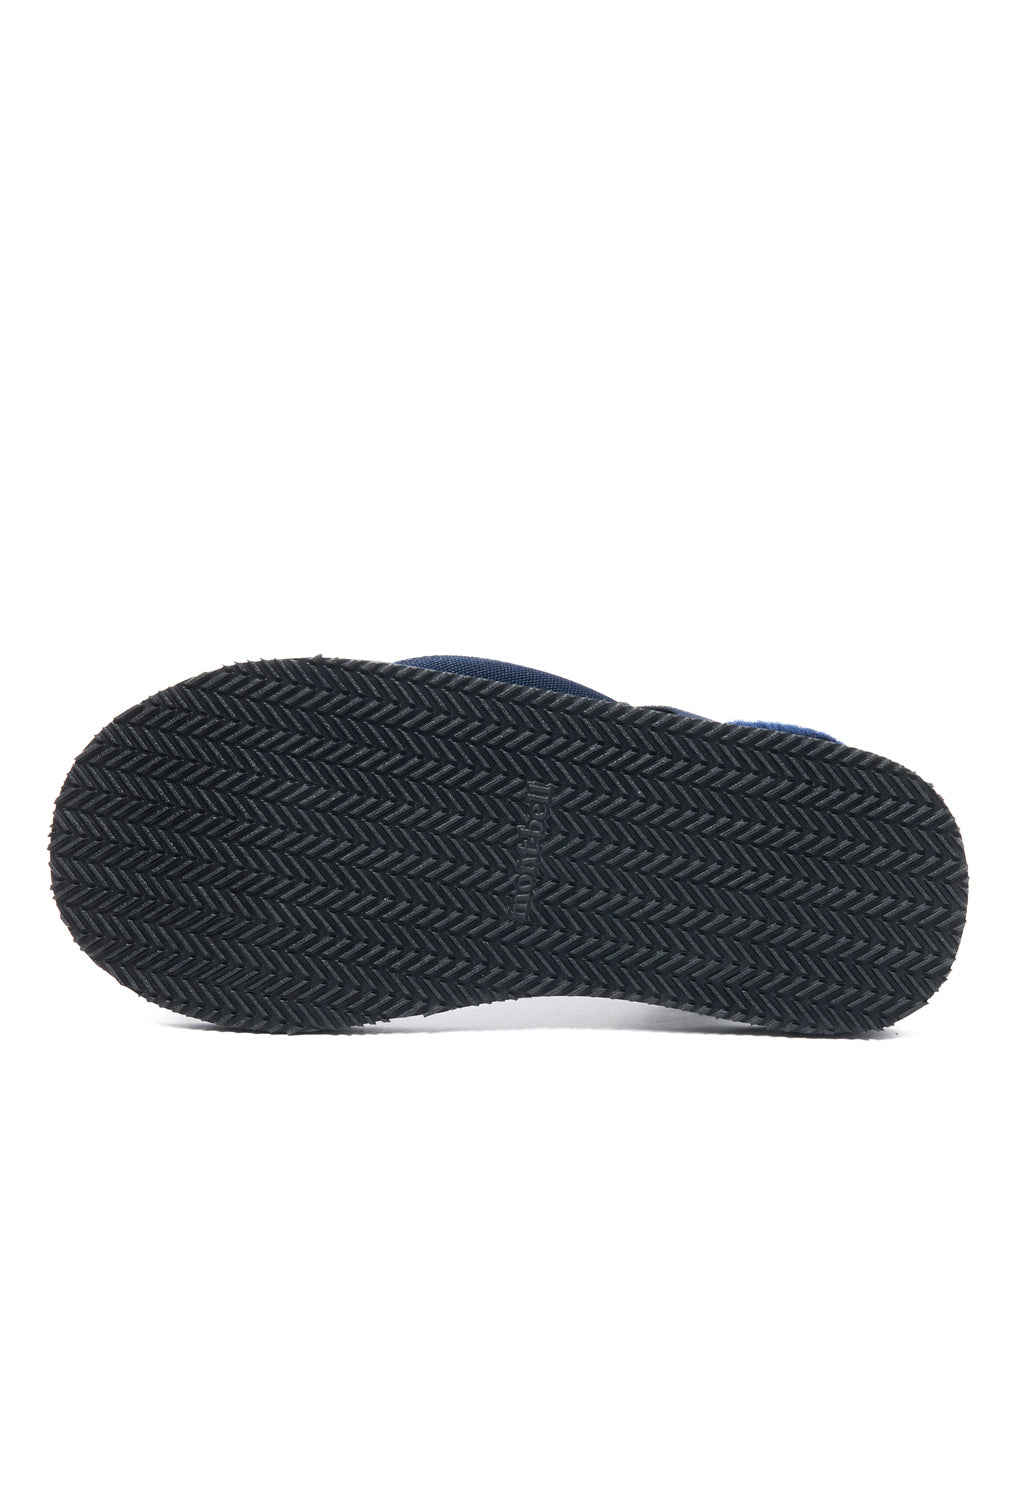 Montbell Lock-On Sandals - Navy